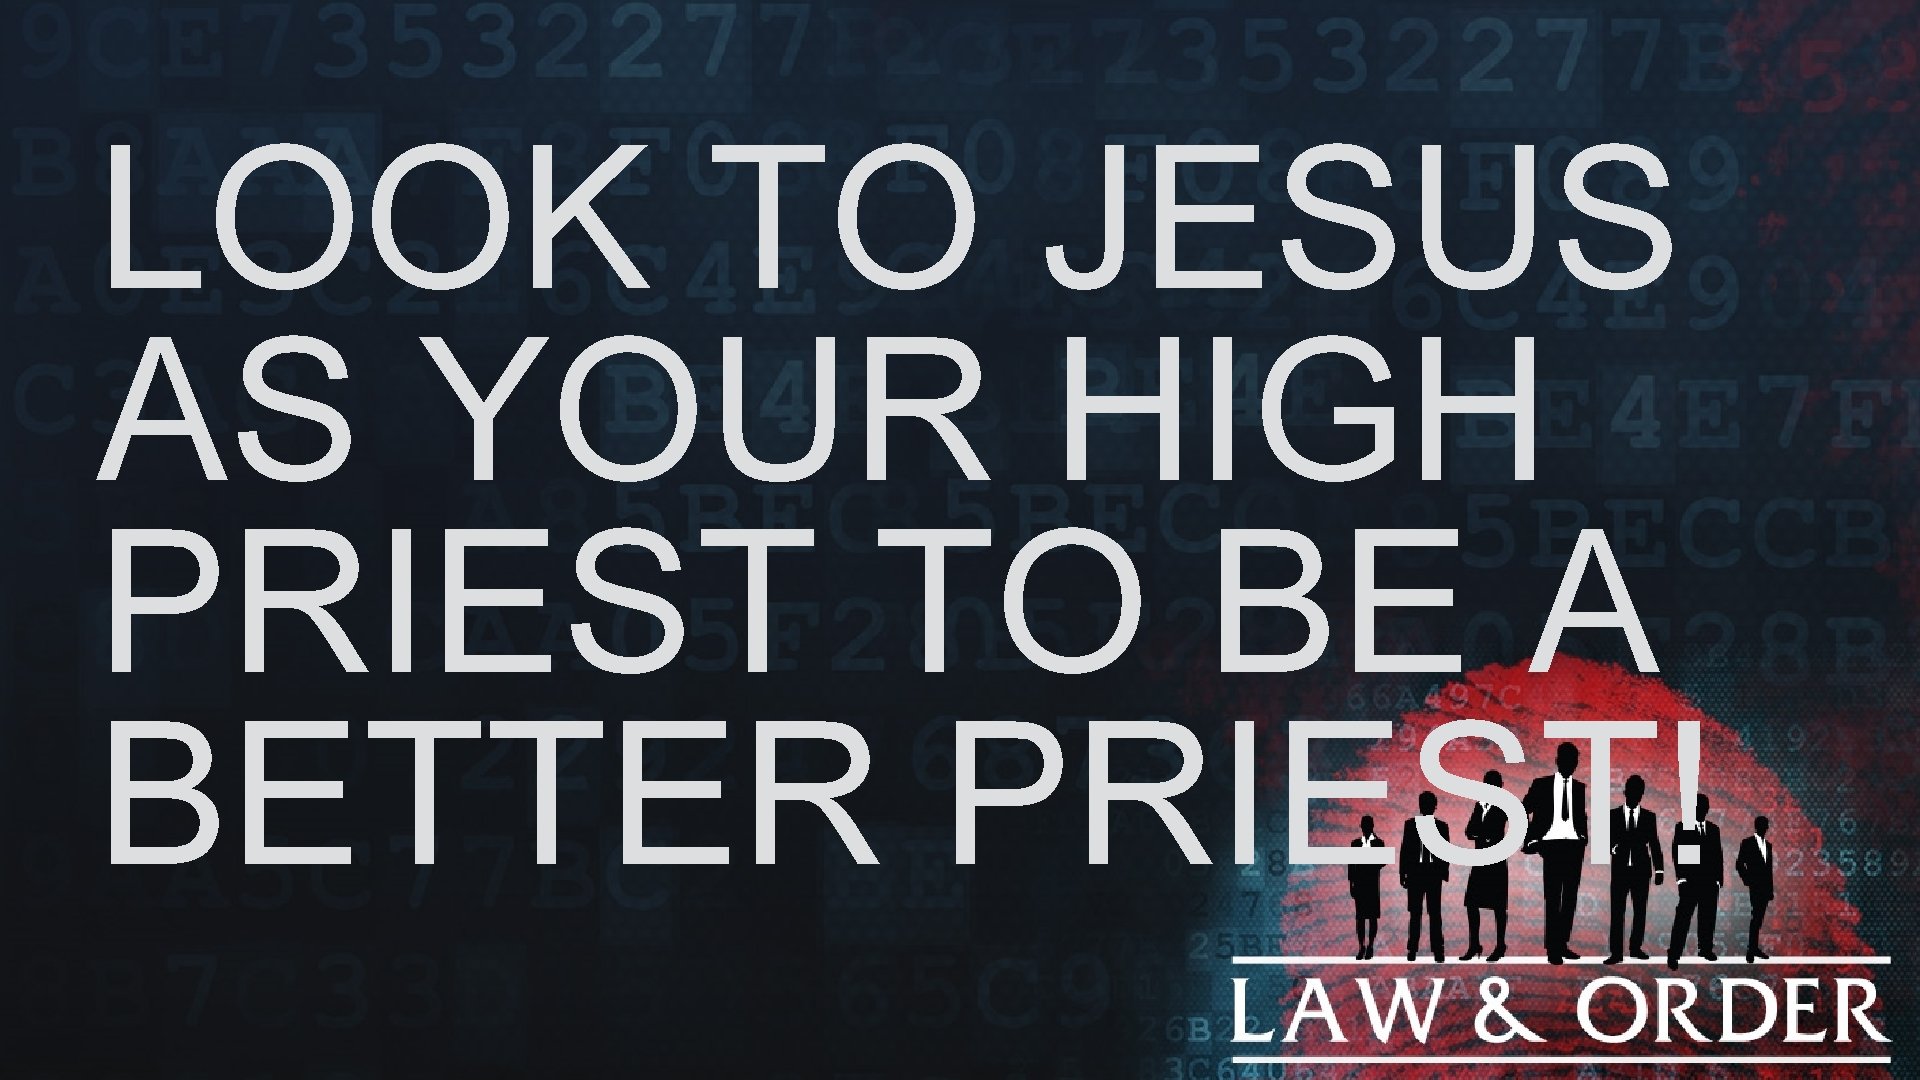 LOOK TO JESUS AS YOUR HIGH PRIEST TO BE A BETTER PRIEST! 